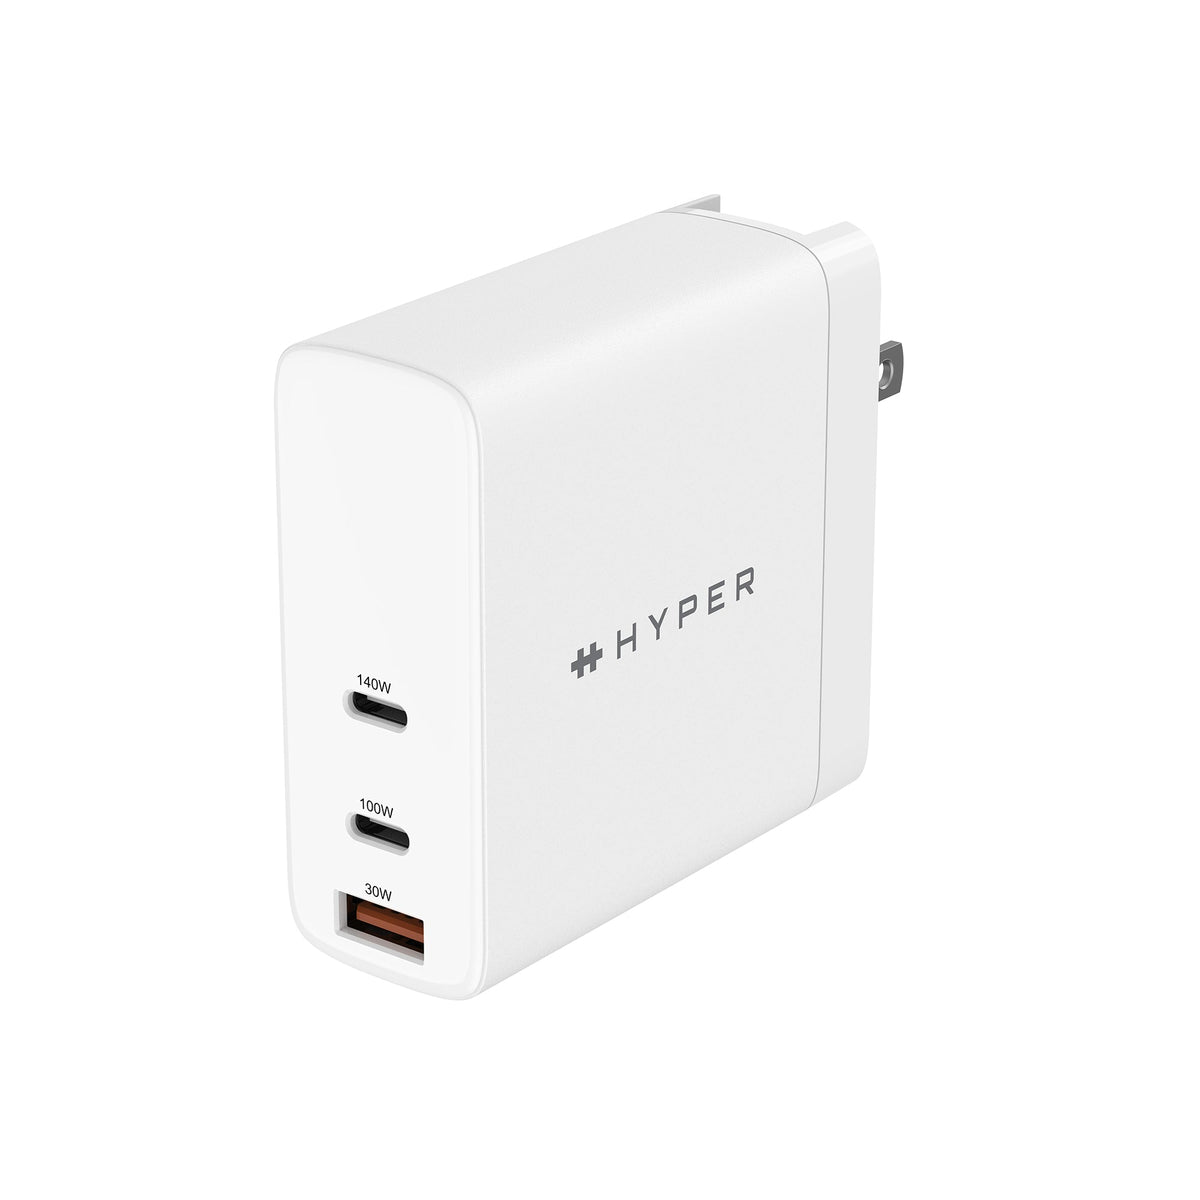 HyperJuice - Power Adapter - GaN technology - 140 Watt - QC 3.0, Power Delivery 3.1 - 3 output connectors (USB, 2 x USB-C) - white